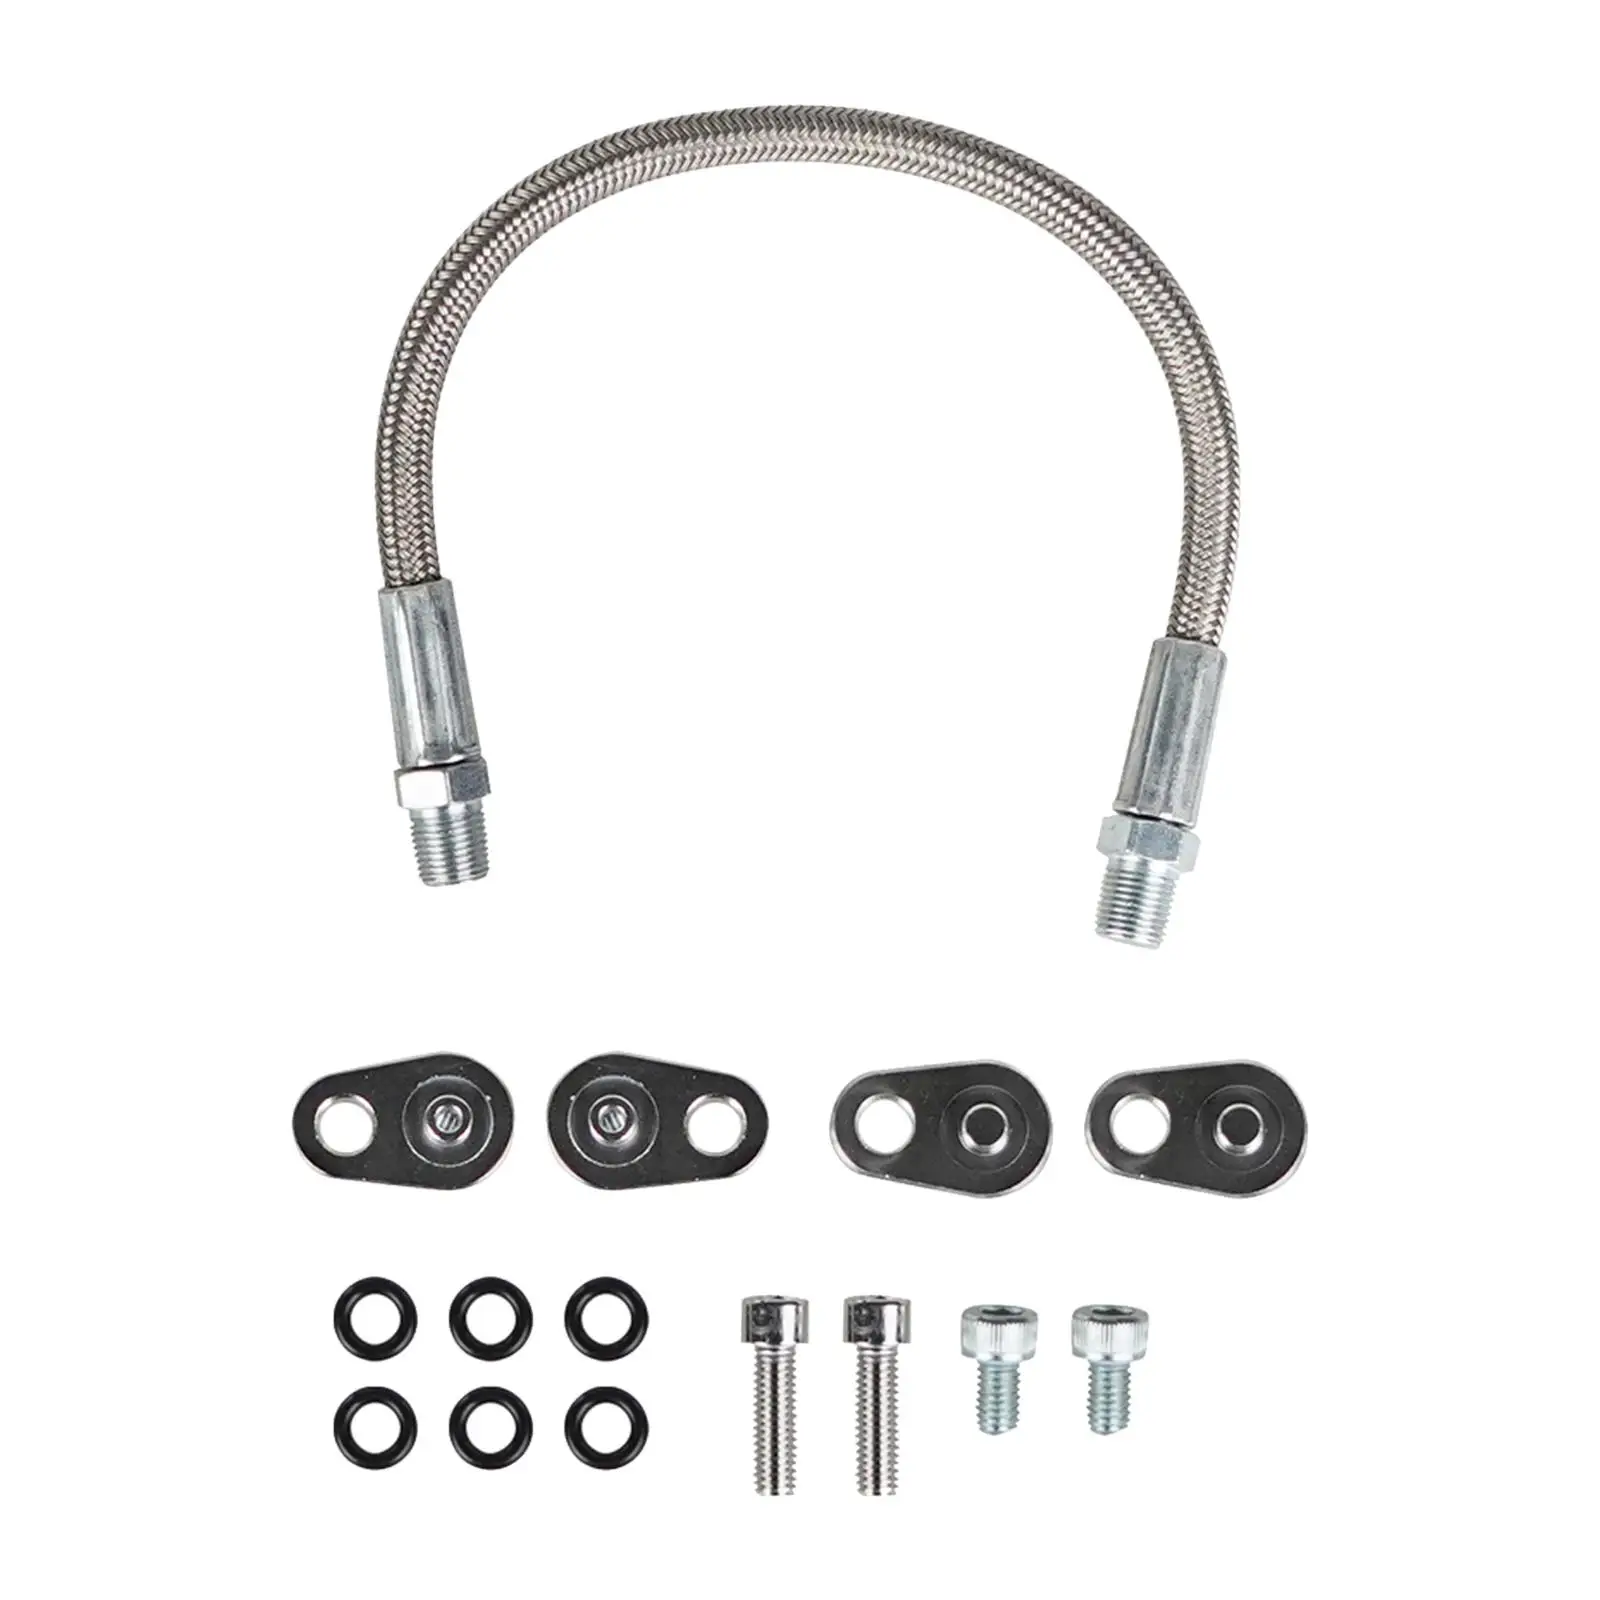 Coolant Steam Crossover Hose Braided Hose Kit for GM LS Series Engines